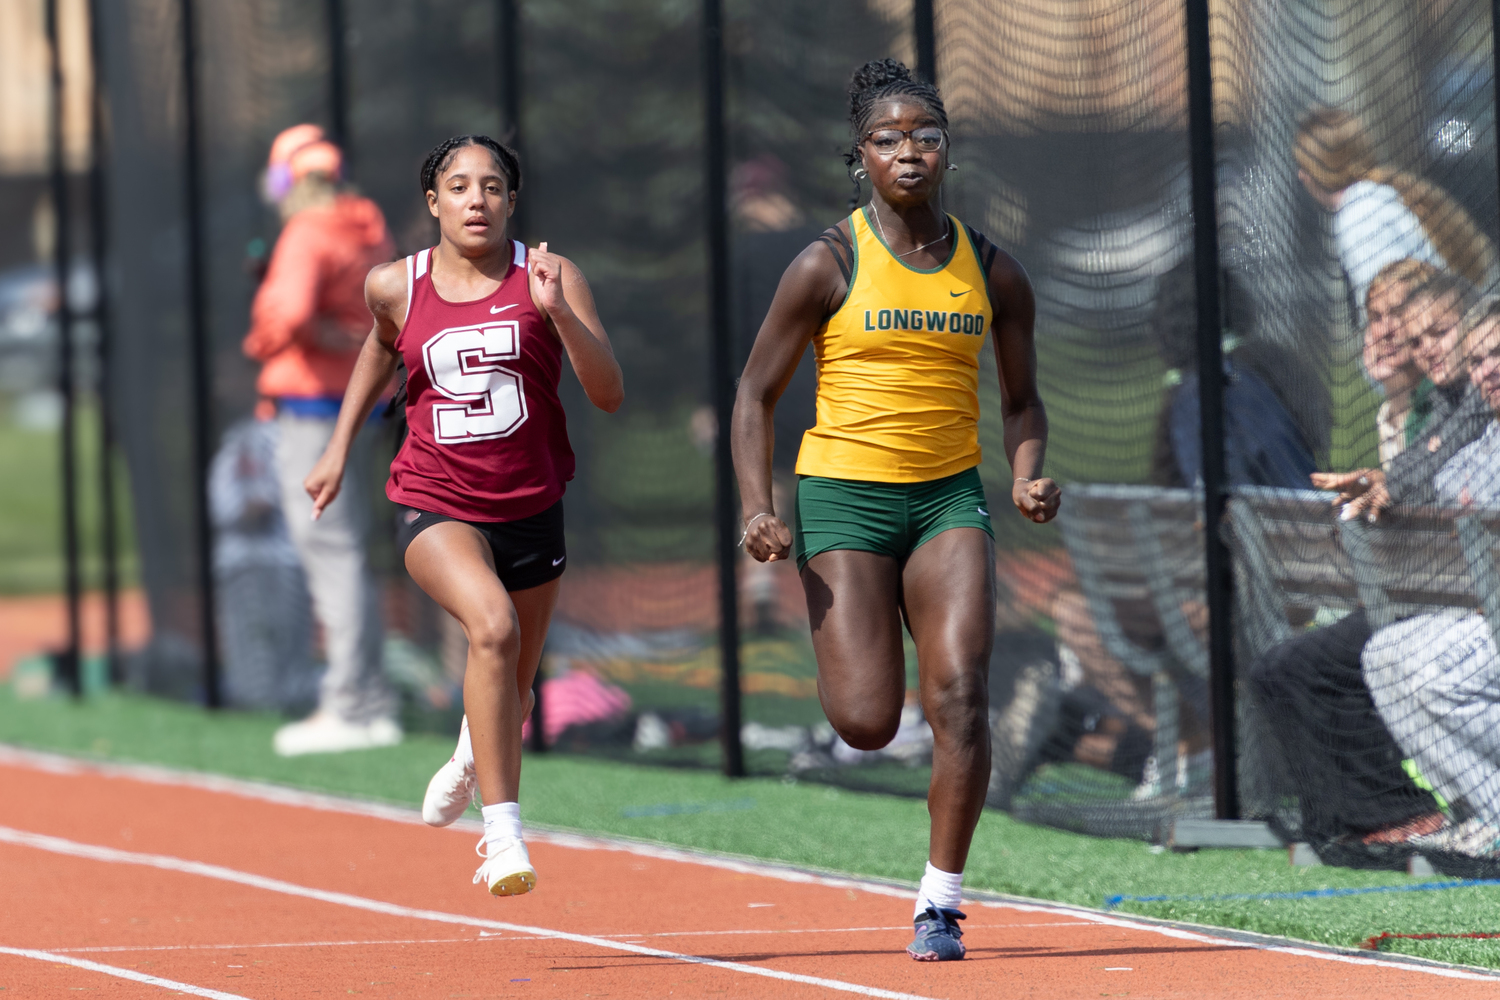 Southampton's Daelyn Palmore running in the Westhampton Beach Invitational on Saturday. RON ESPOSITO